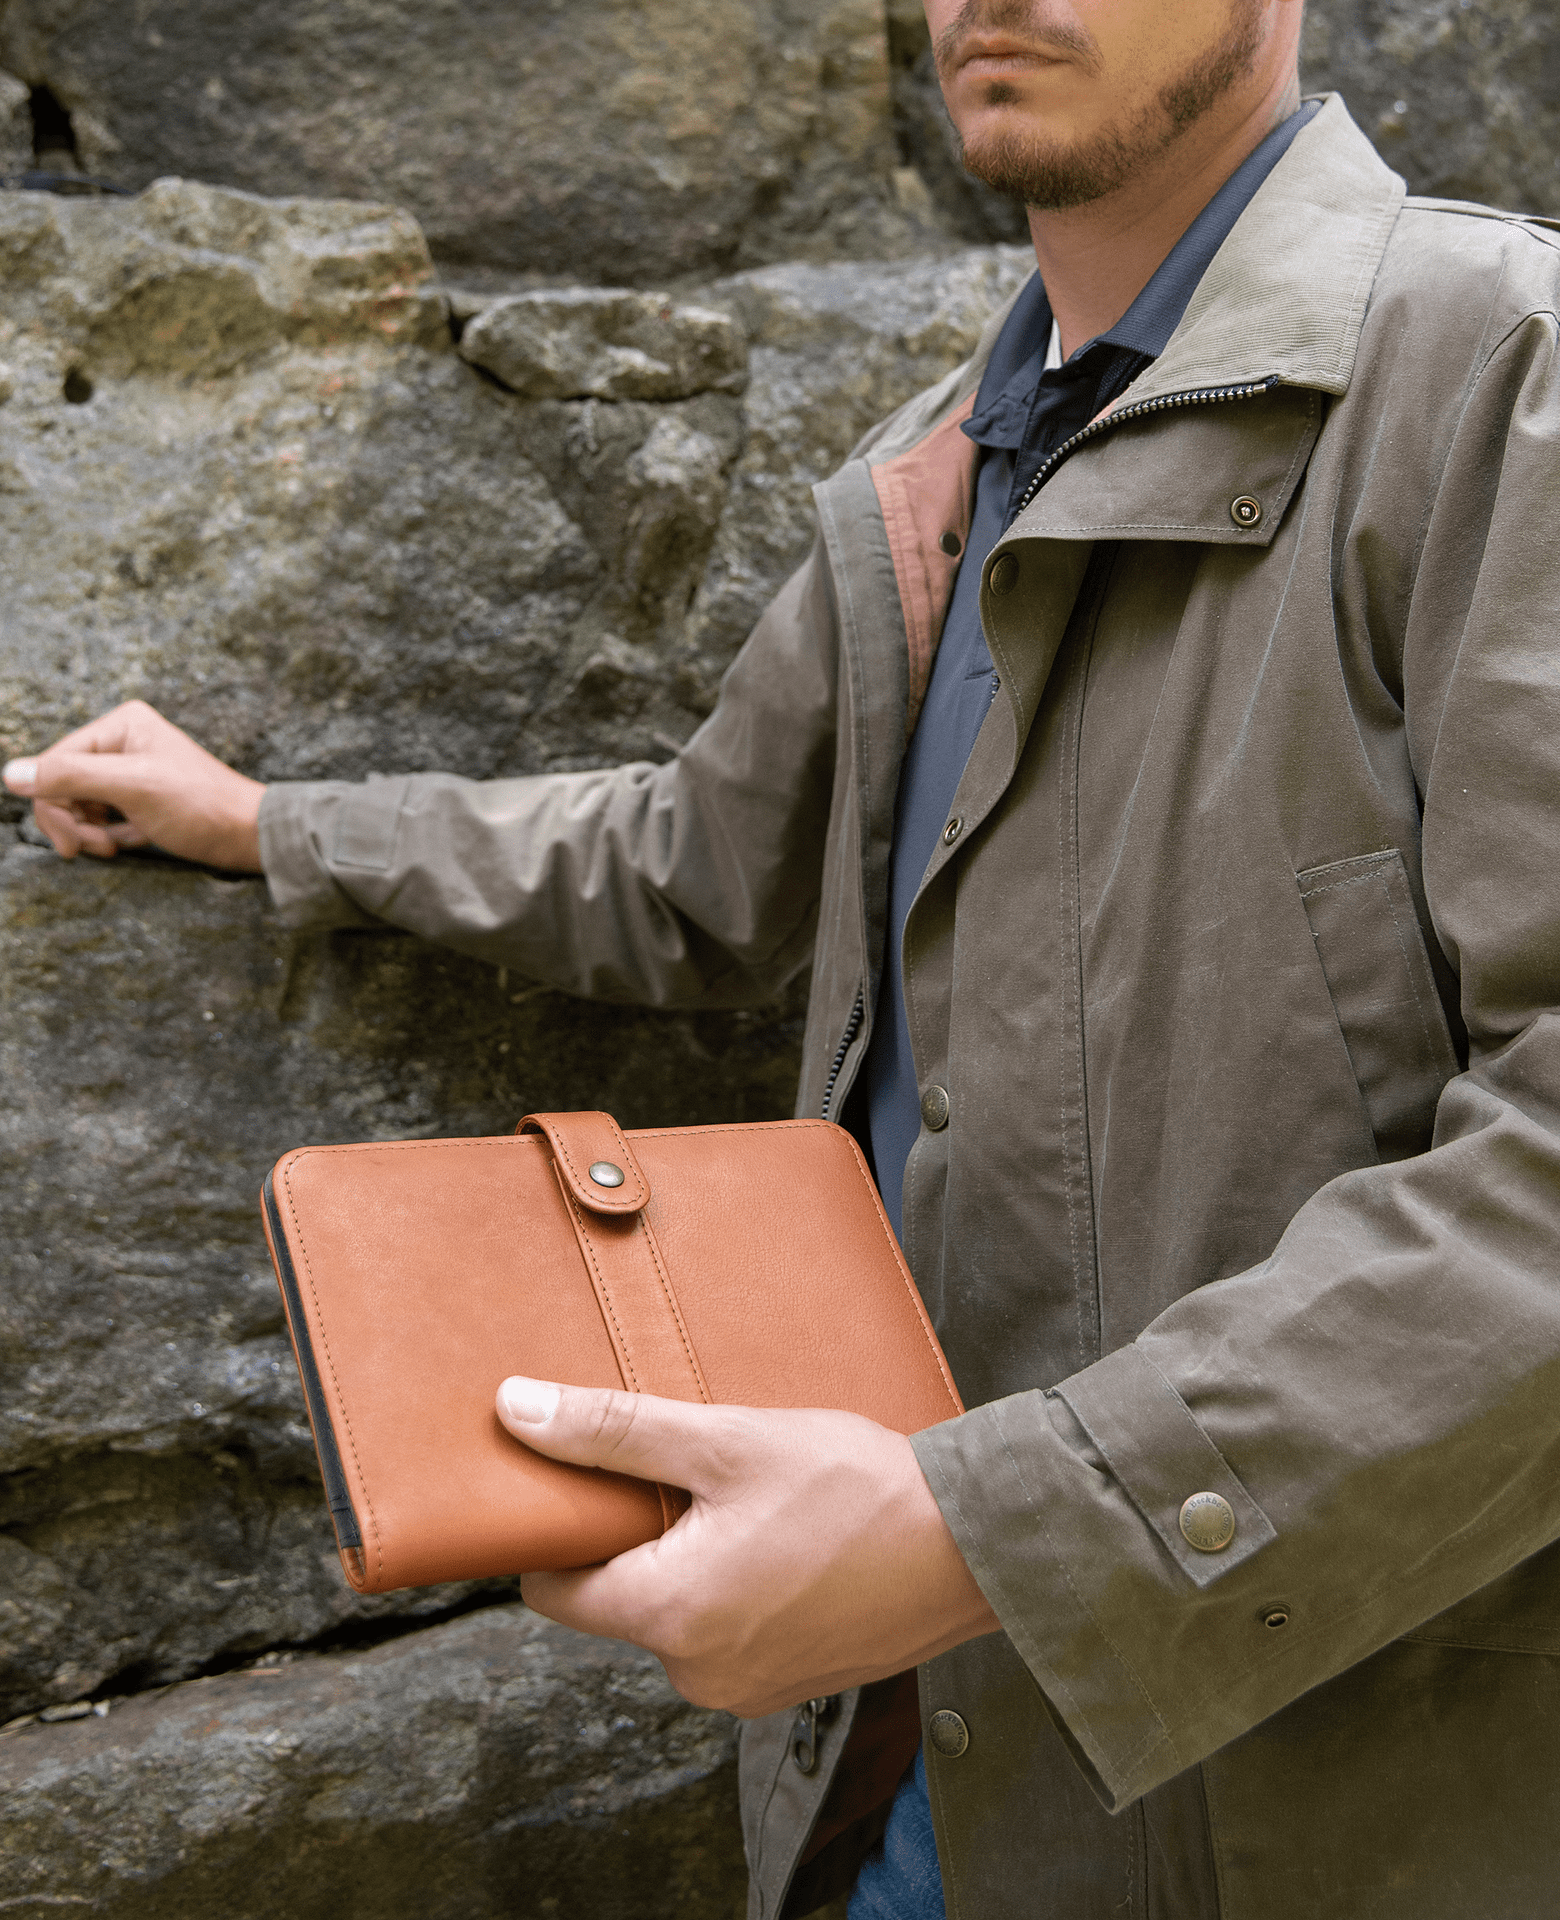 Man carries Escriba small leather journal